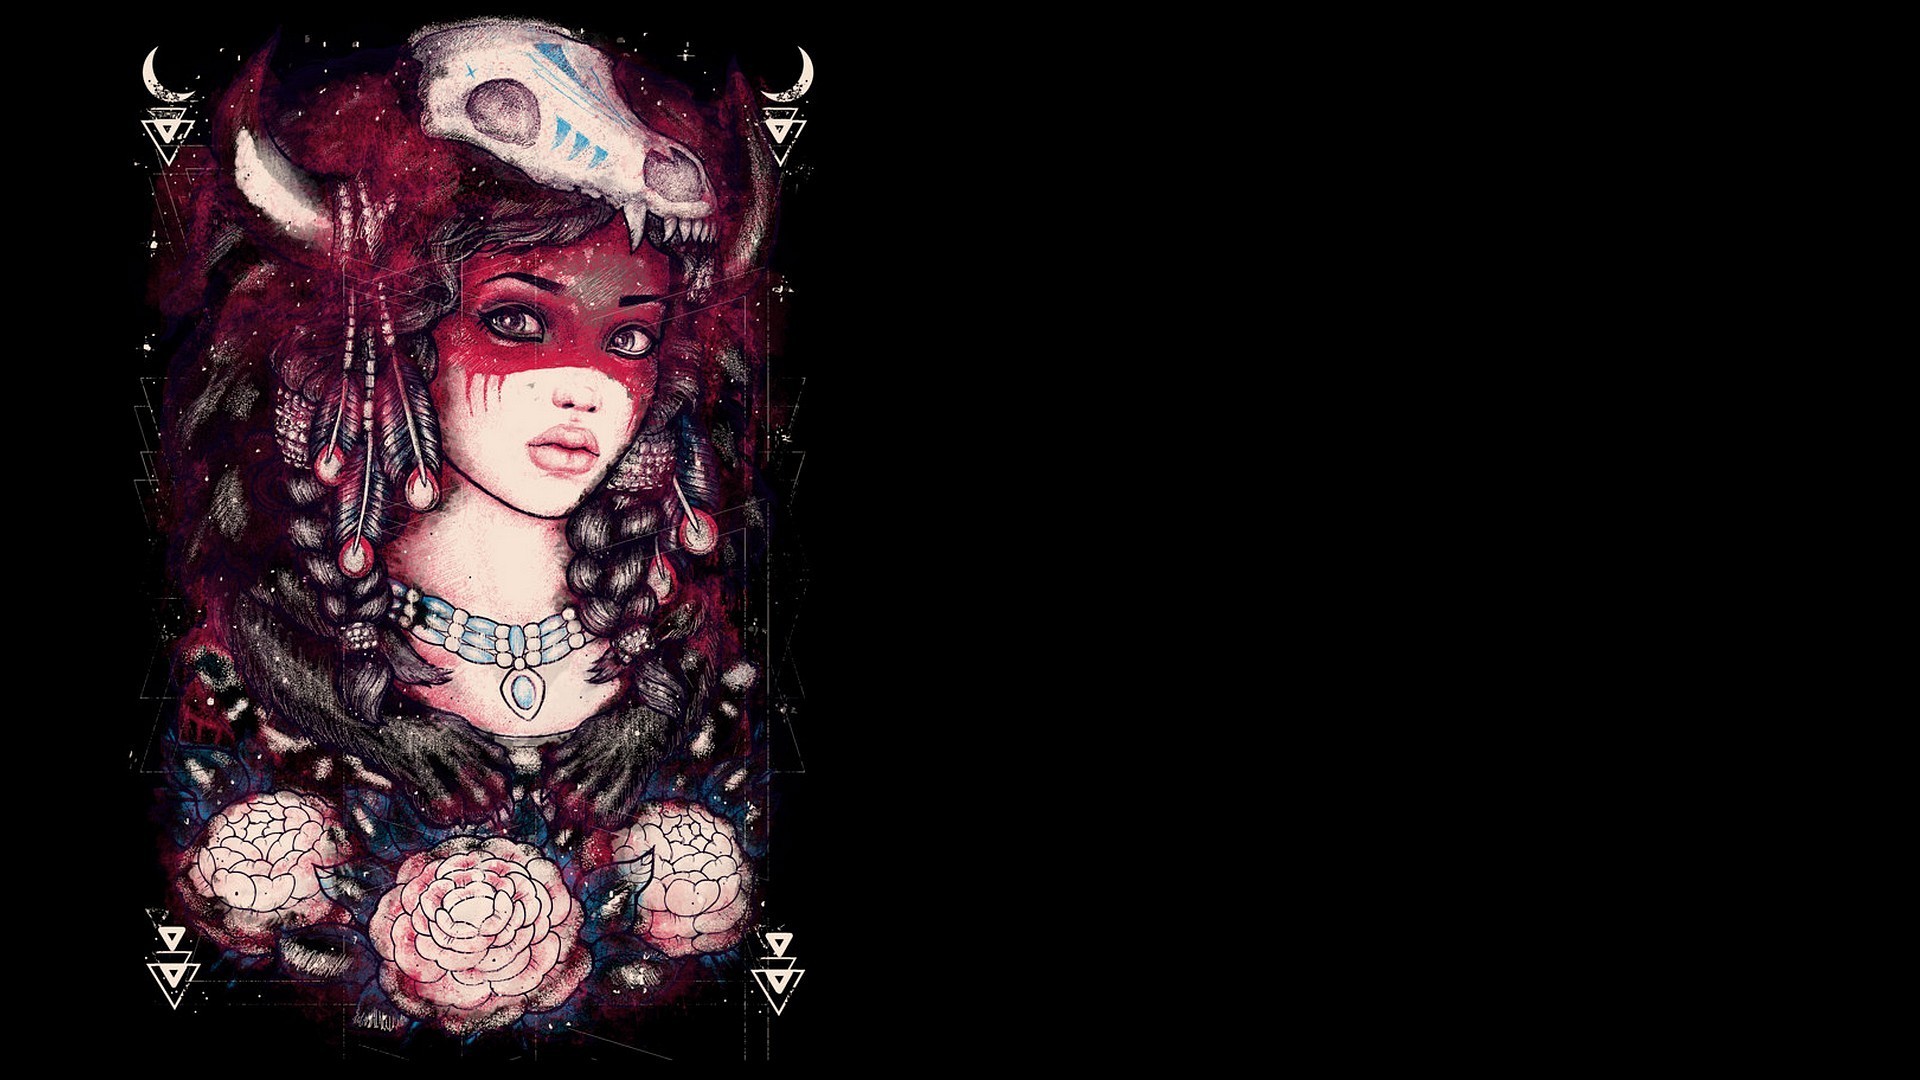 General 1920x1080 fantasy art artwork fantasy girl skull women flowers necklace face paint looking at viewer black background simple background